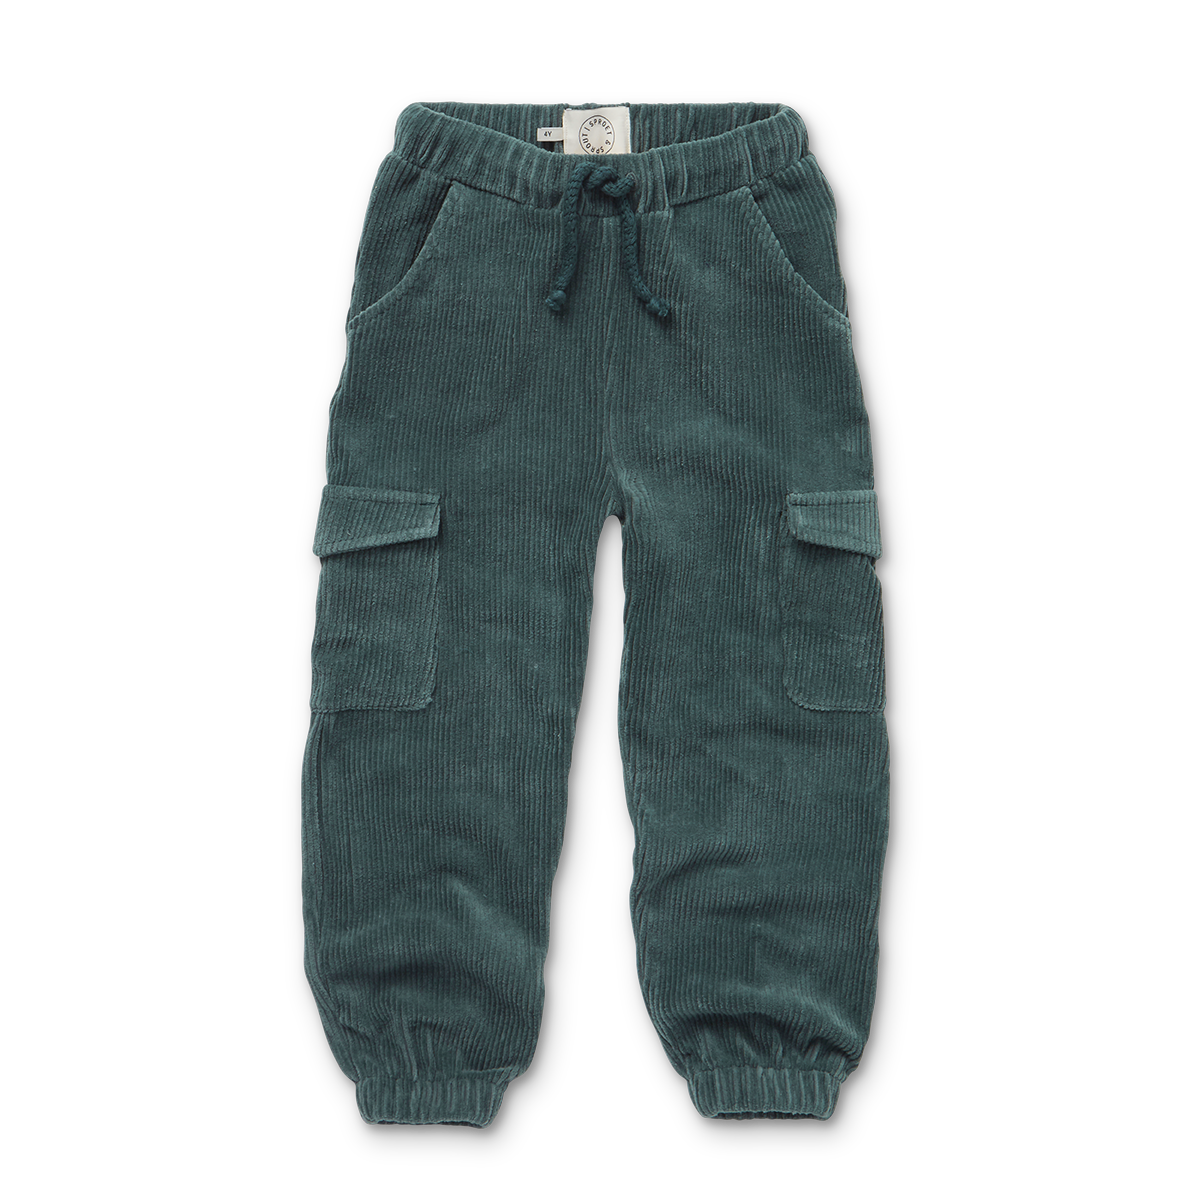 Sweatpants cargo - Sproet Sprout